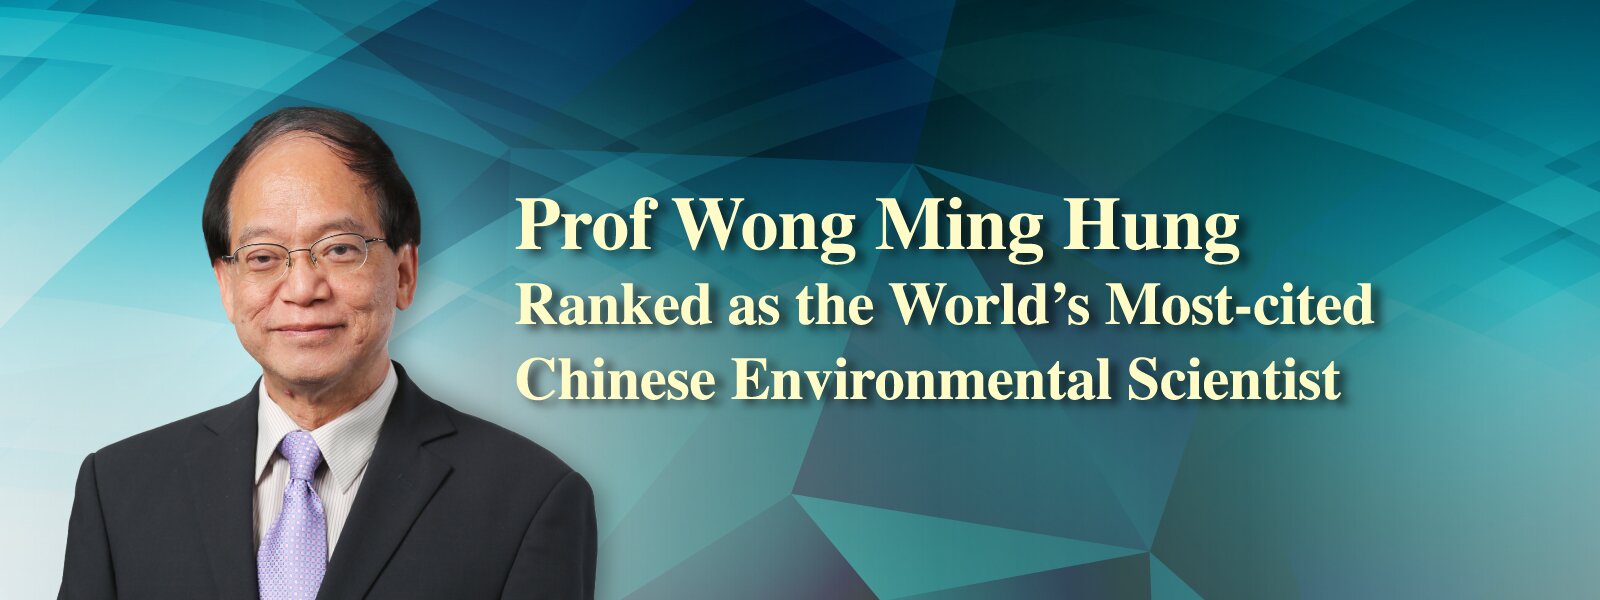 Prof Wong Ming Hung Ranked as the World’s Most-cited Chinese Environmental Scientist